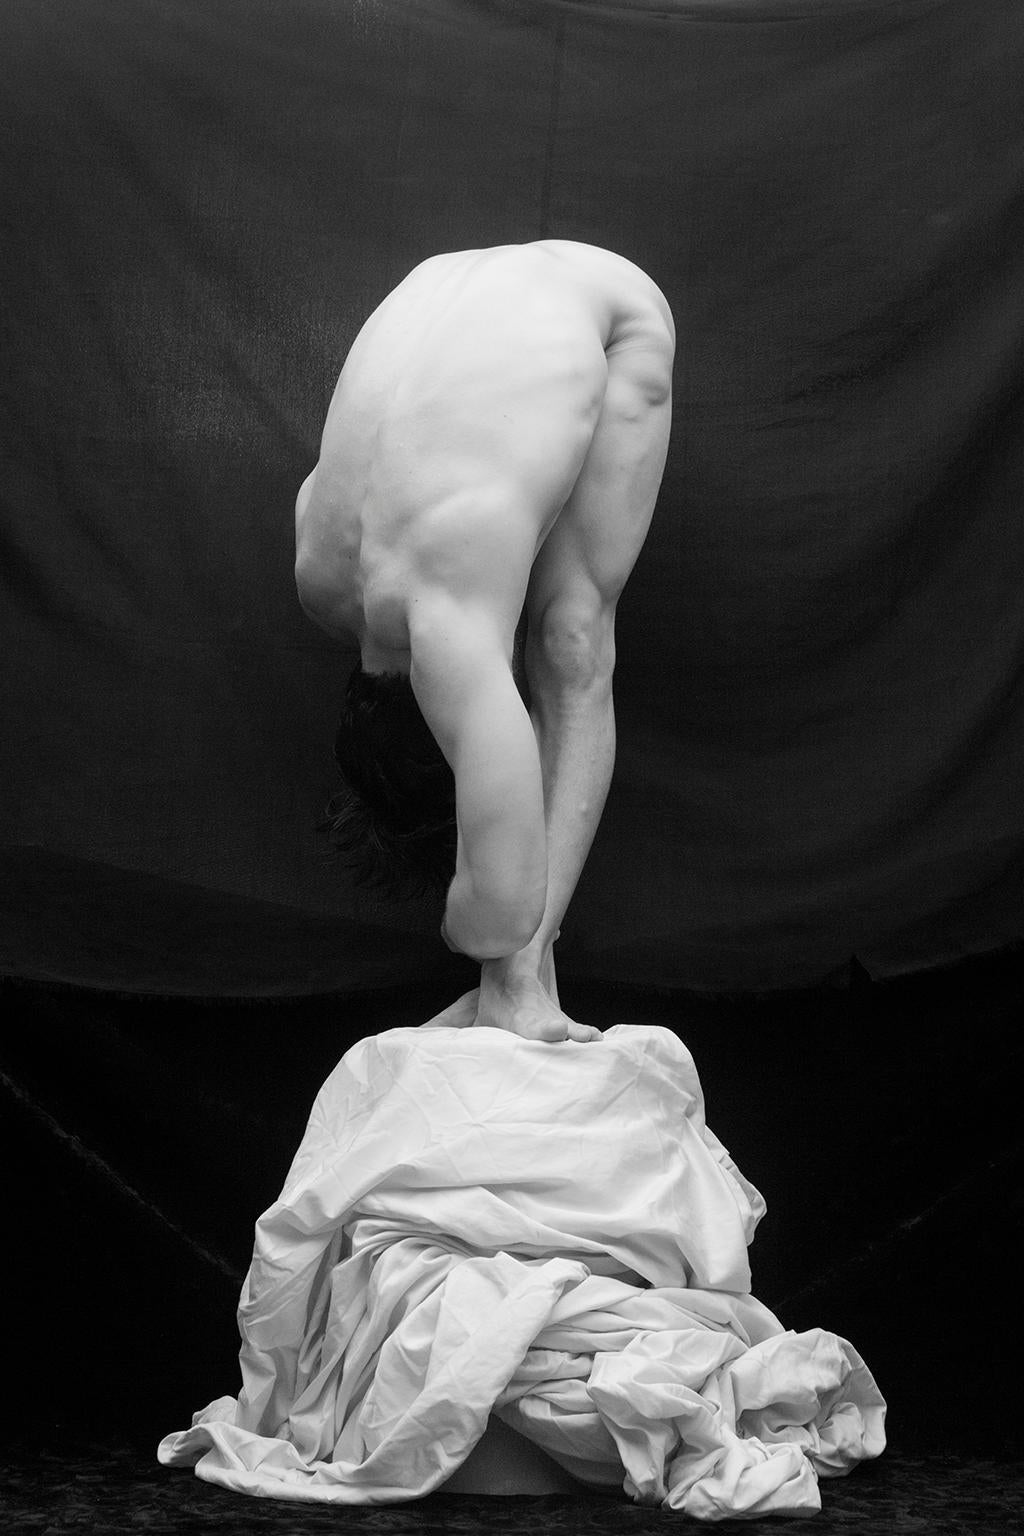 Ricky Cohete Nude Photograph - Acto Uno, From the series Acto Uno. Male Nude Limited Edition B&W Photograph